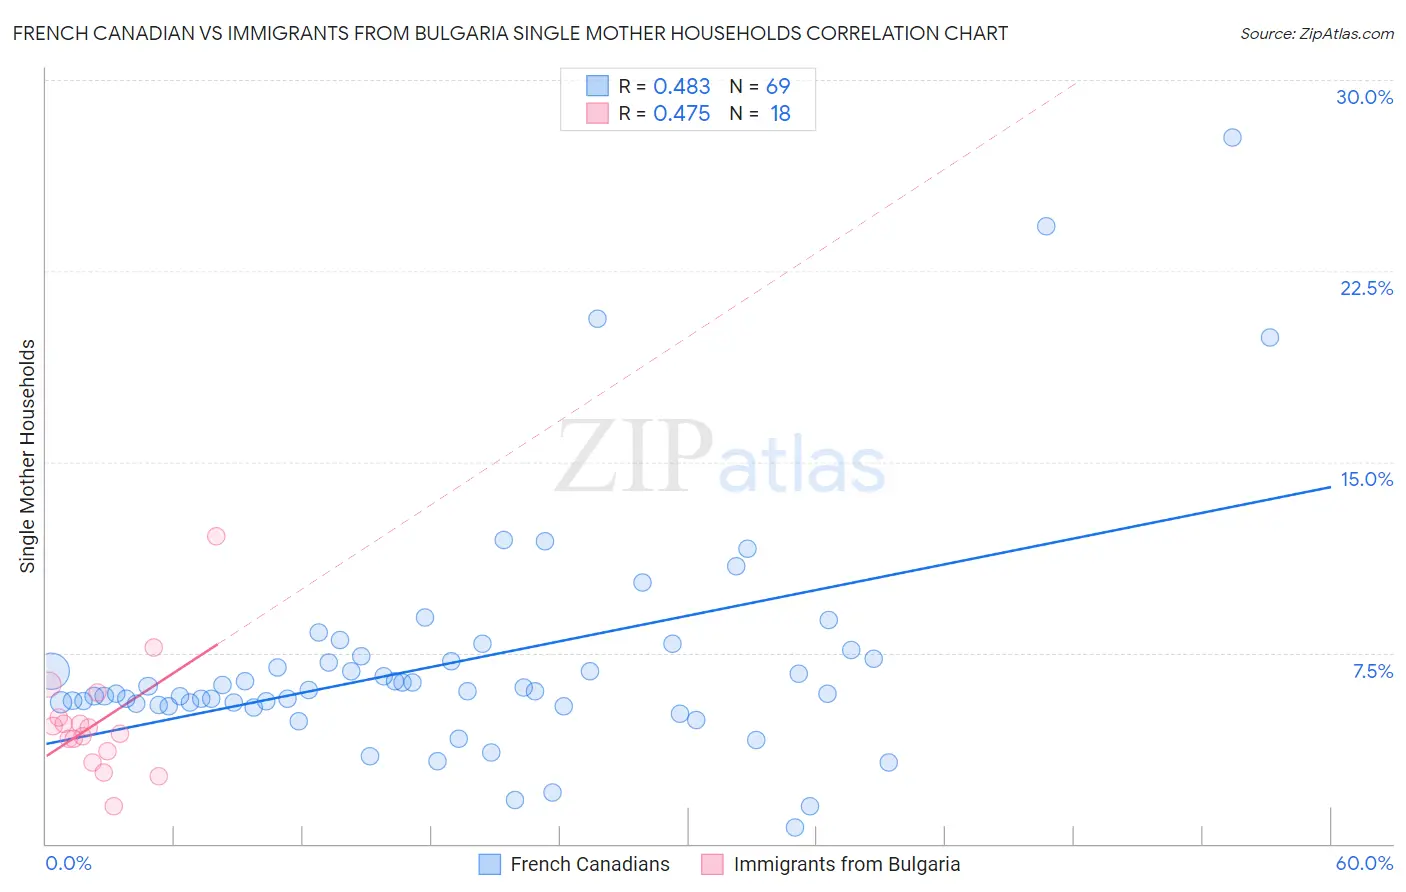 French Canadian vs Immigrants from Bulgaria Single Mother Households